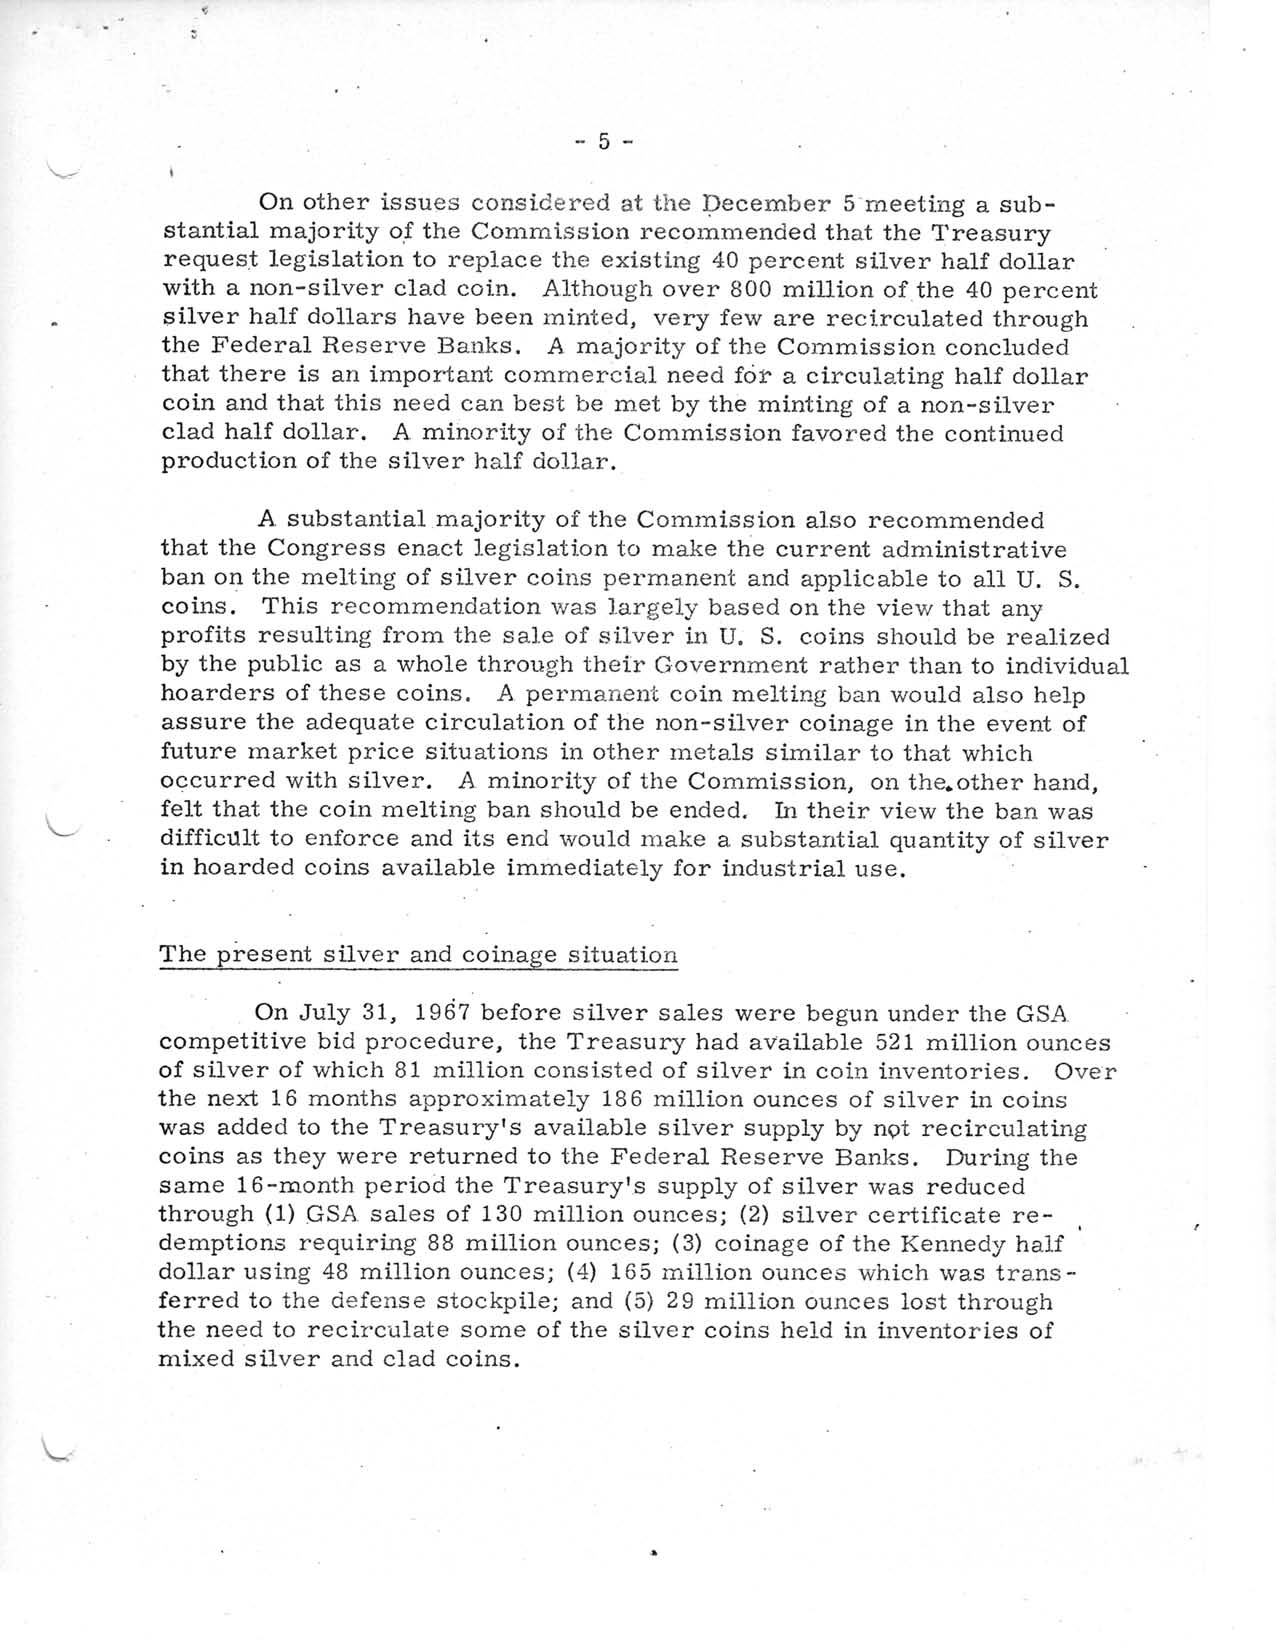 Historic Press Release: Letter to President From Treasury Secretary, Page 6